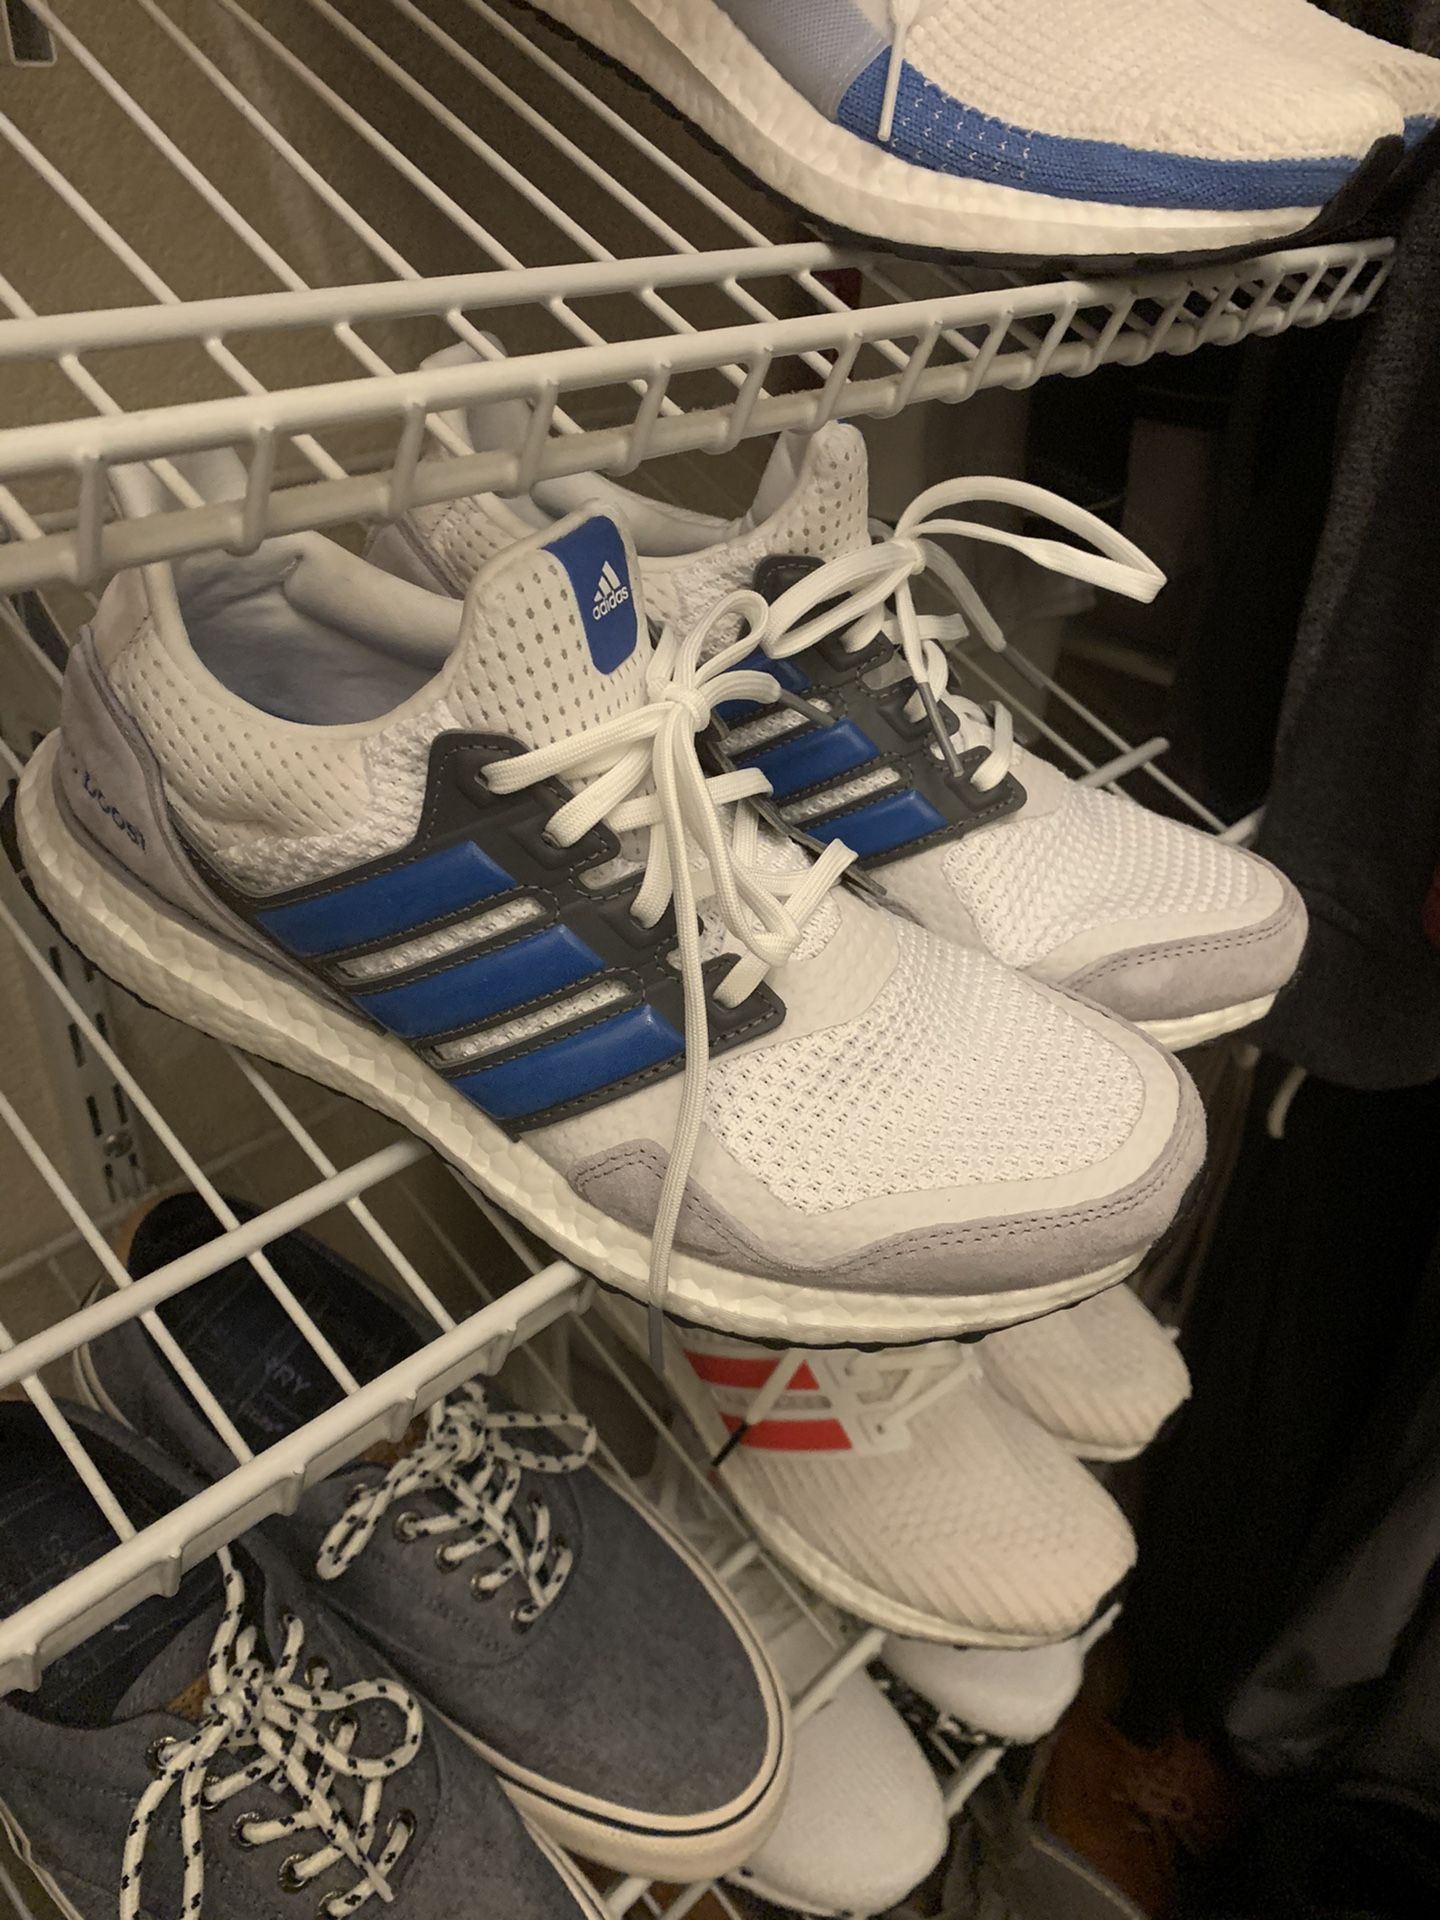 Men’s adidas ultra boost size 8.5 worn once